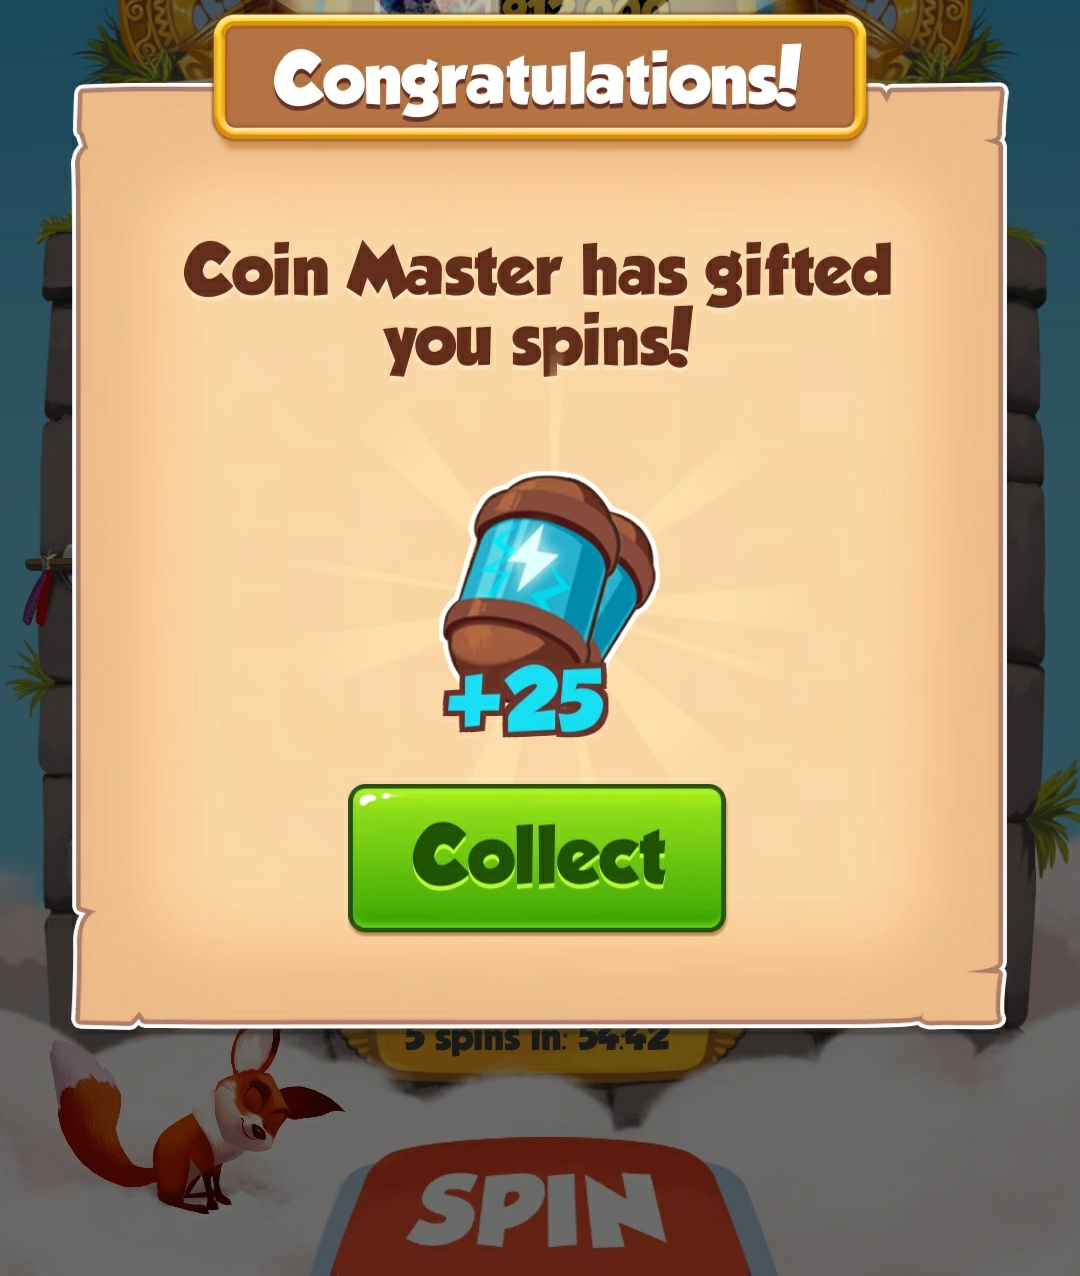 coin master link for spins